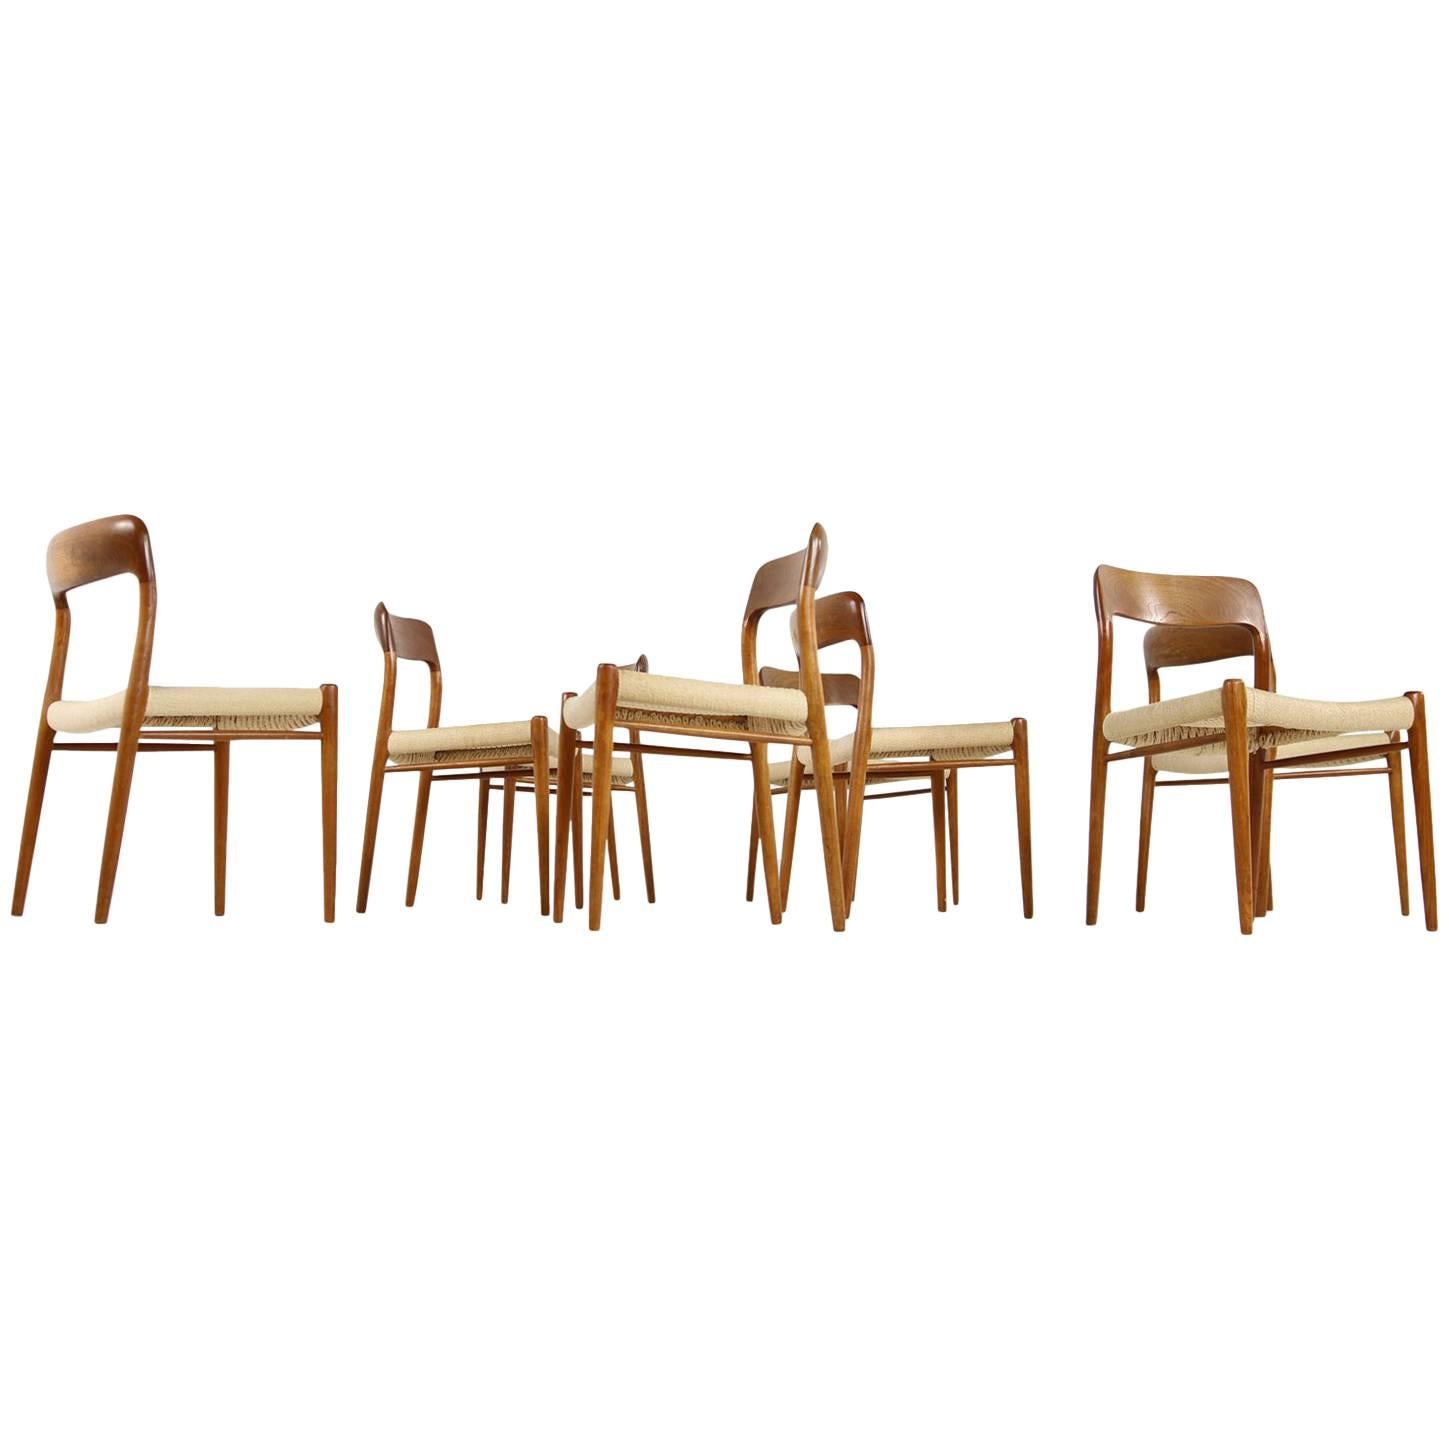 Eight 1960s Danish Teak and Cane Dining Room Chairs by Niels O. Moller Mod. 75